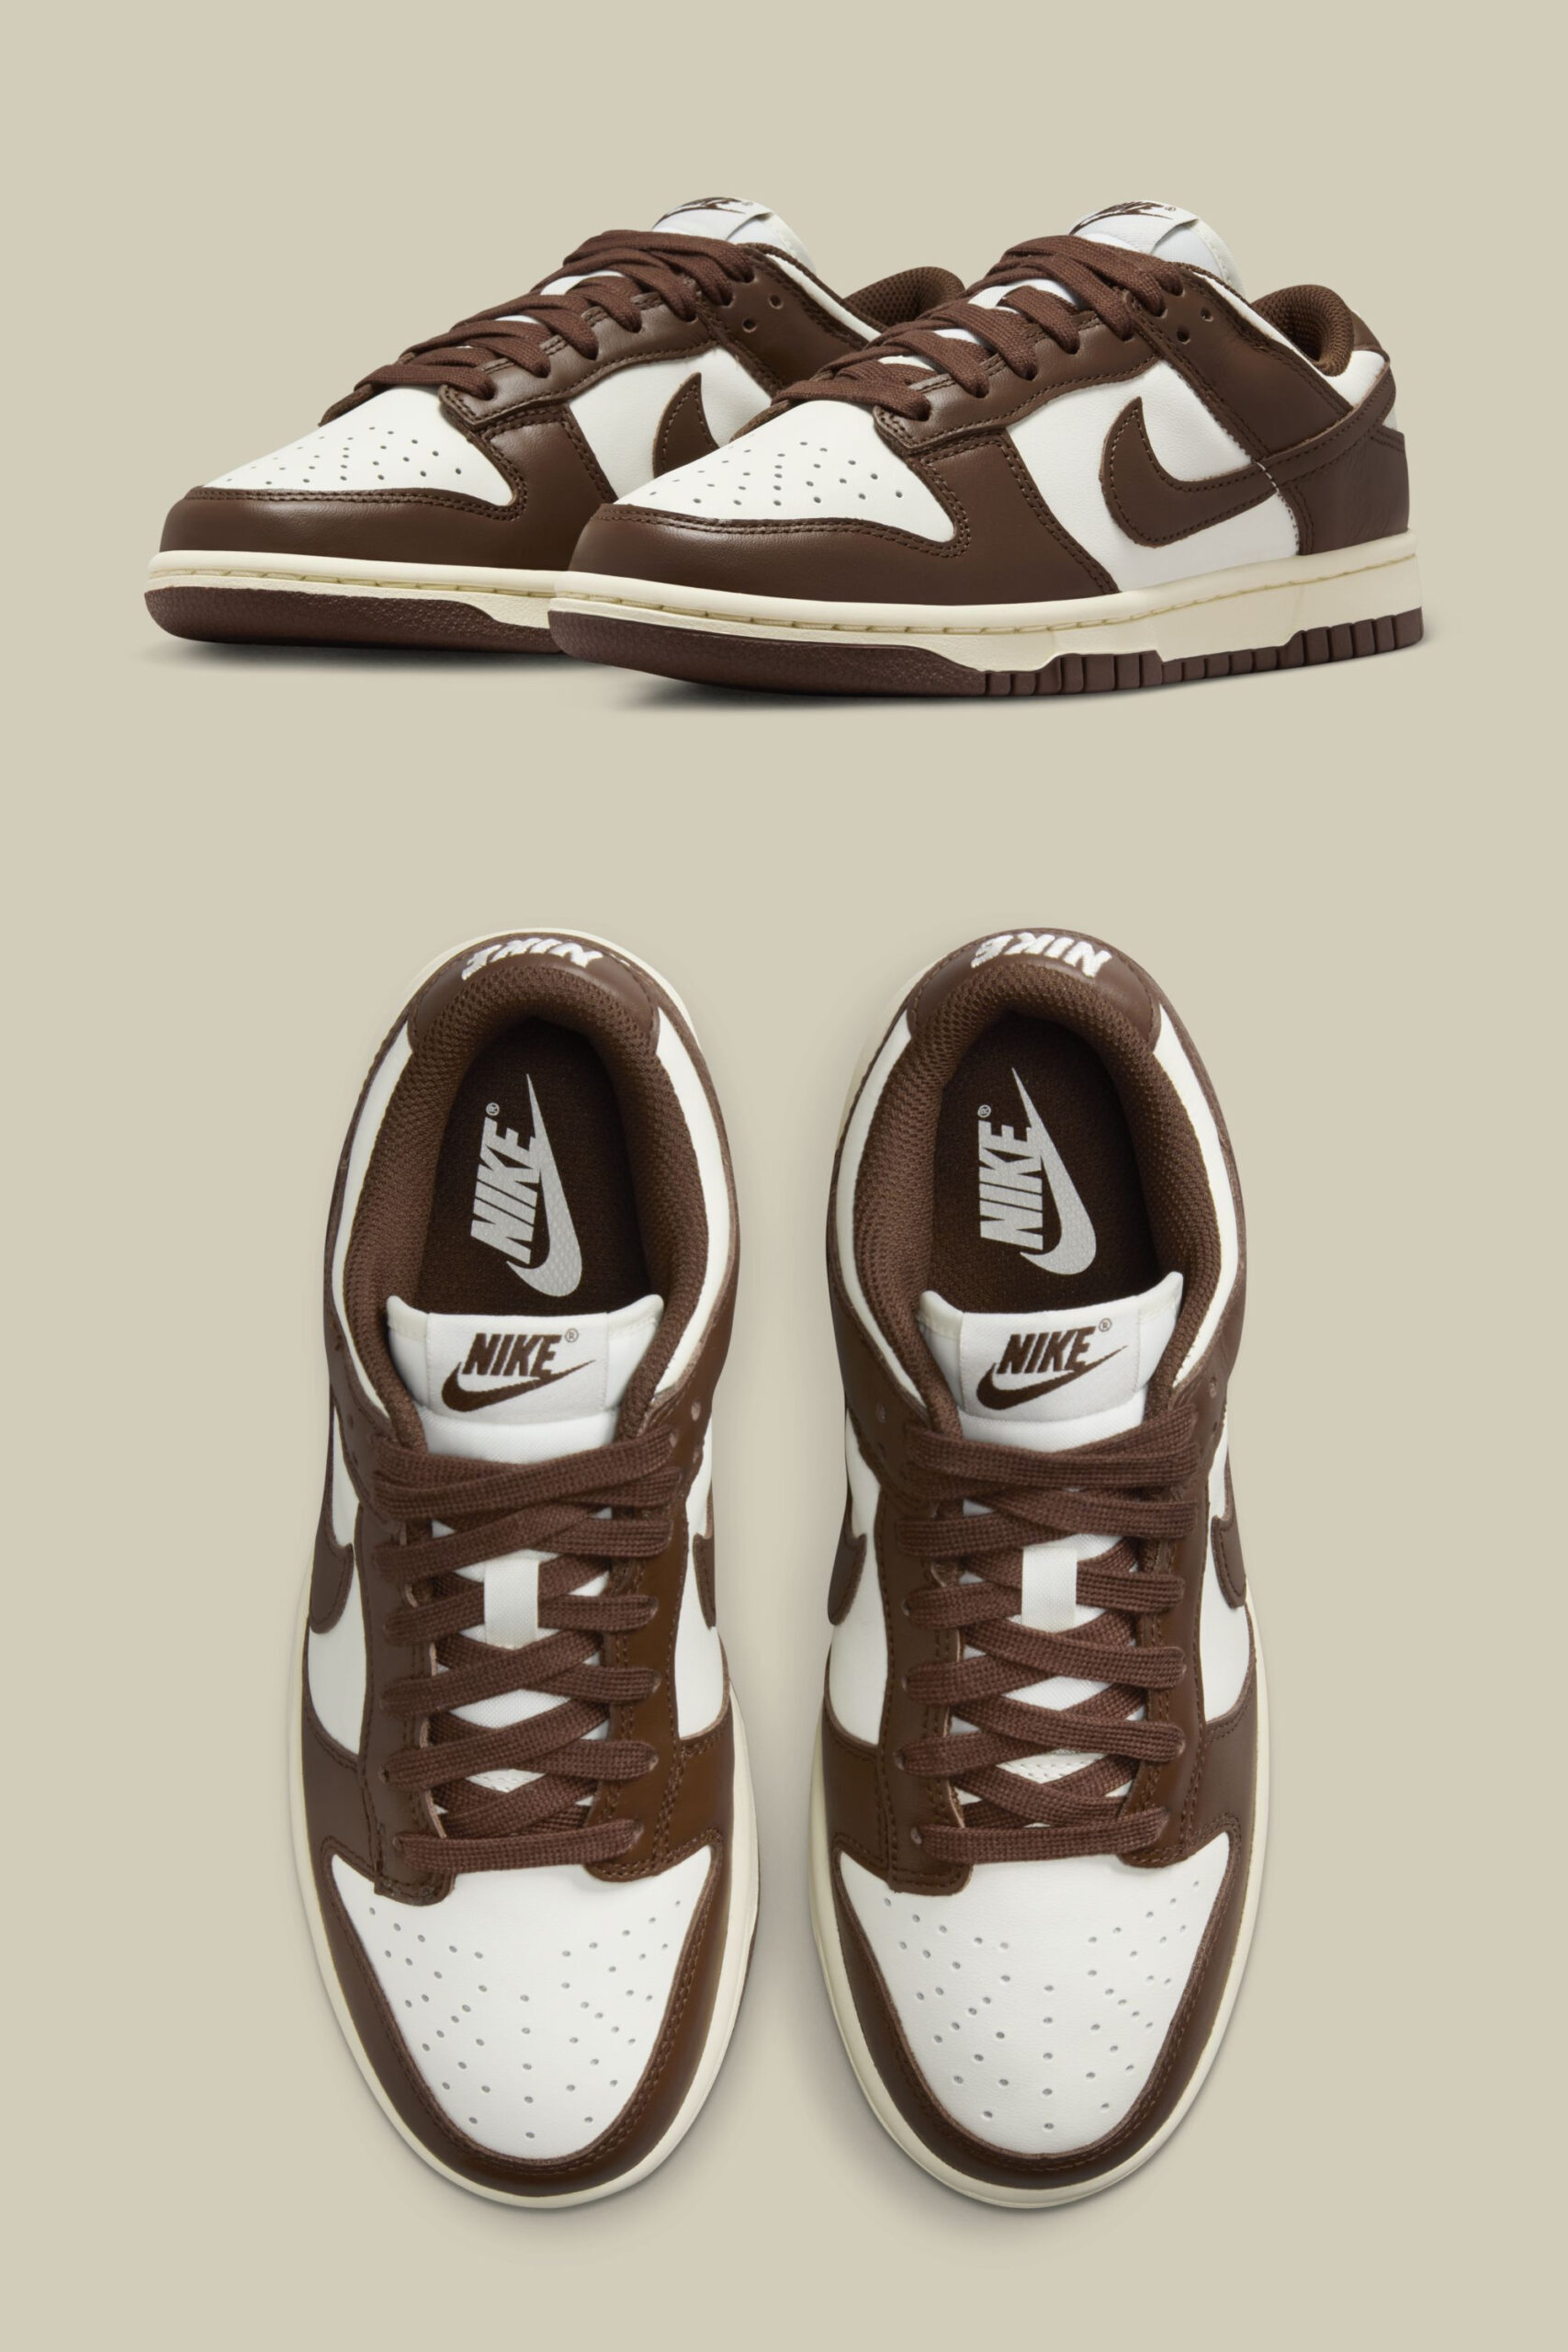 Nike Dunk Low Cacao Wow sneakerb0b RELEASES